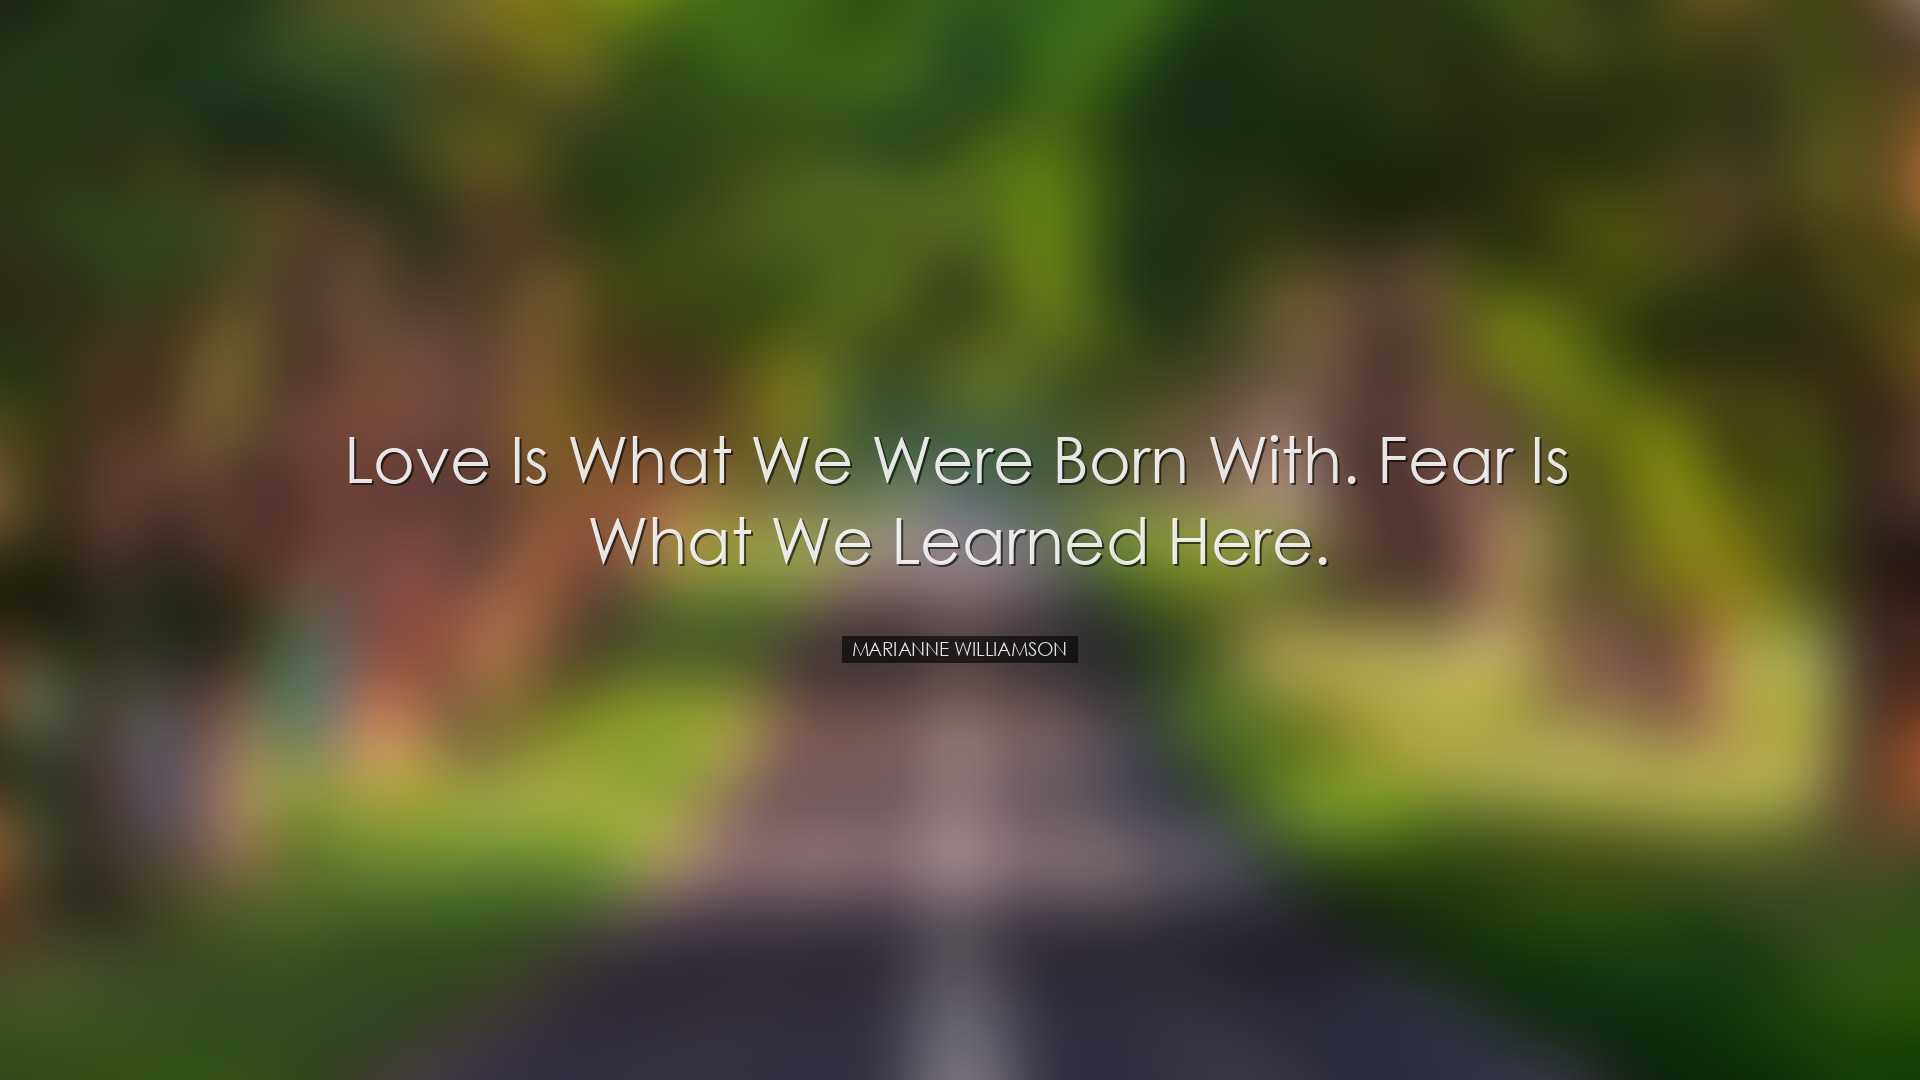 Love is what we were born with. Fear is what we learned here. - Ma